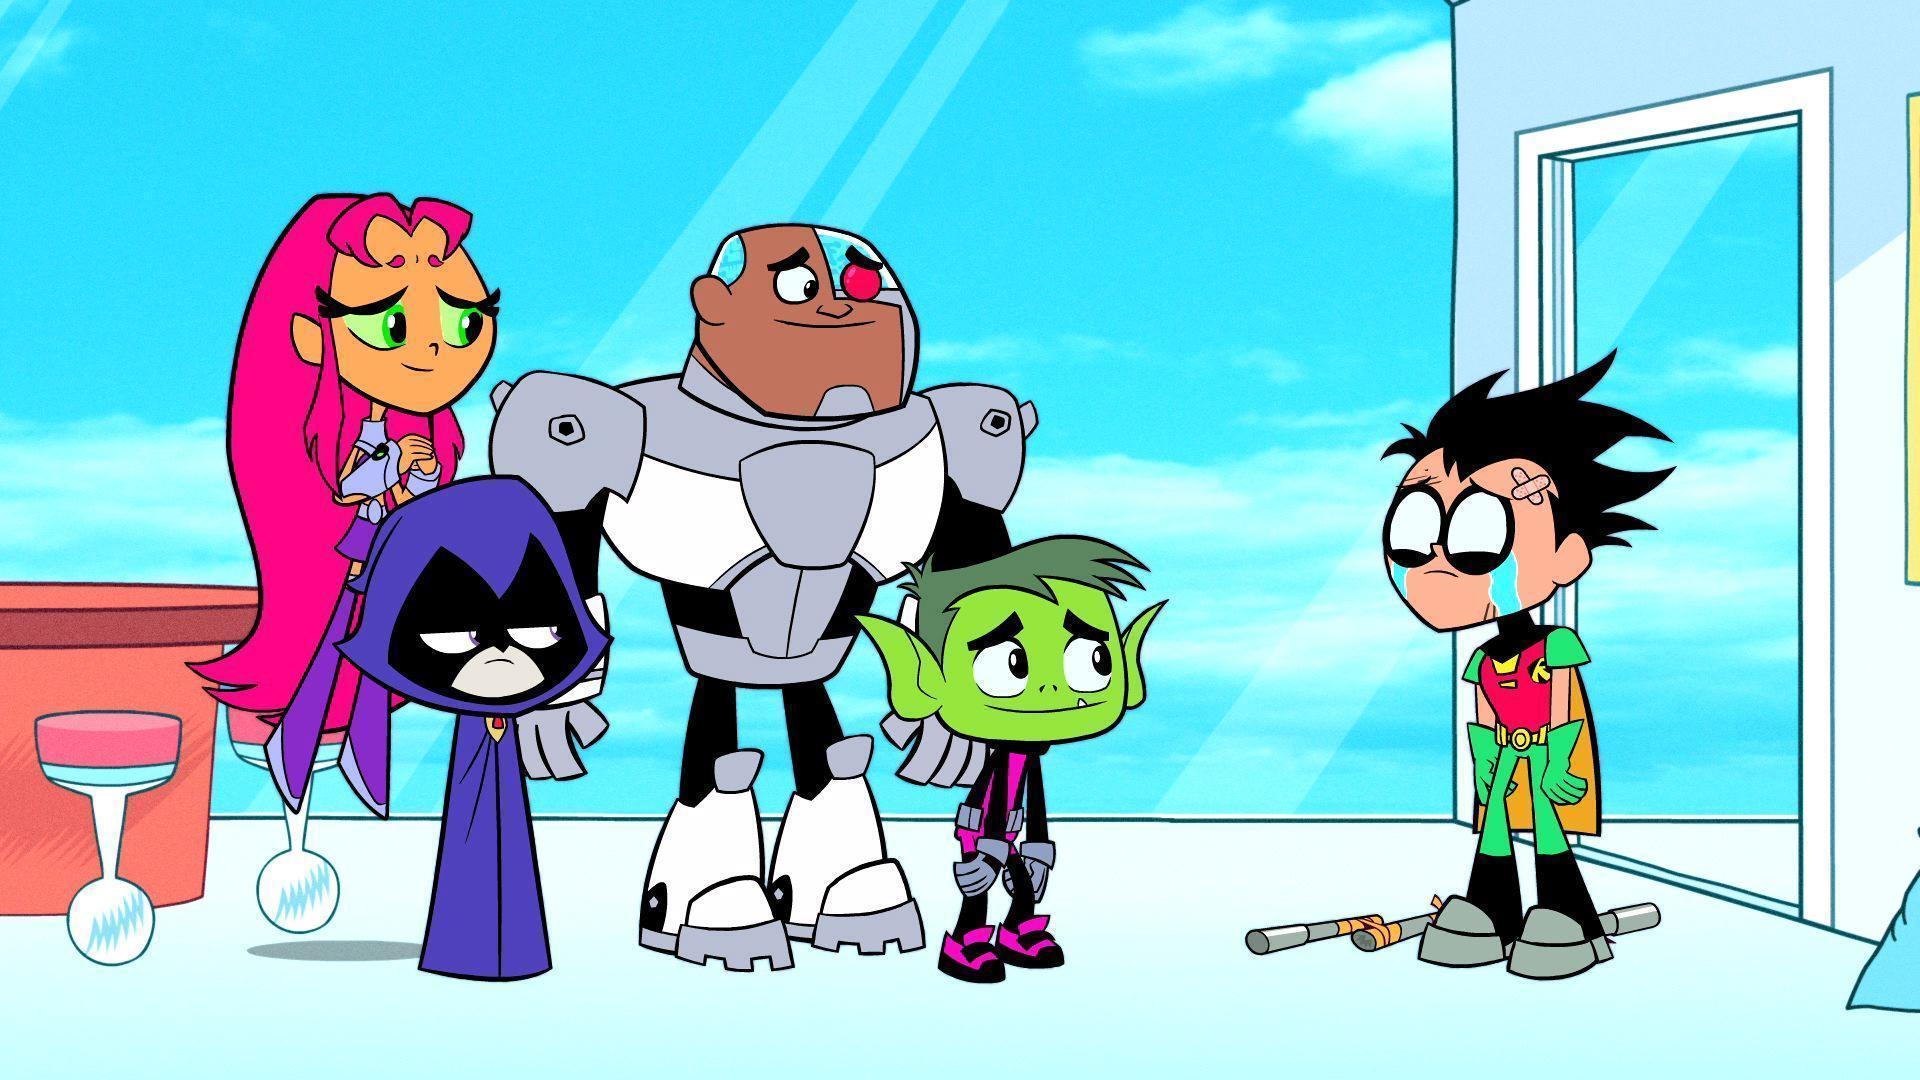 New Episode of Teen Titans Go! “Staff Meeting” Airs August 13